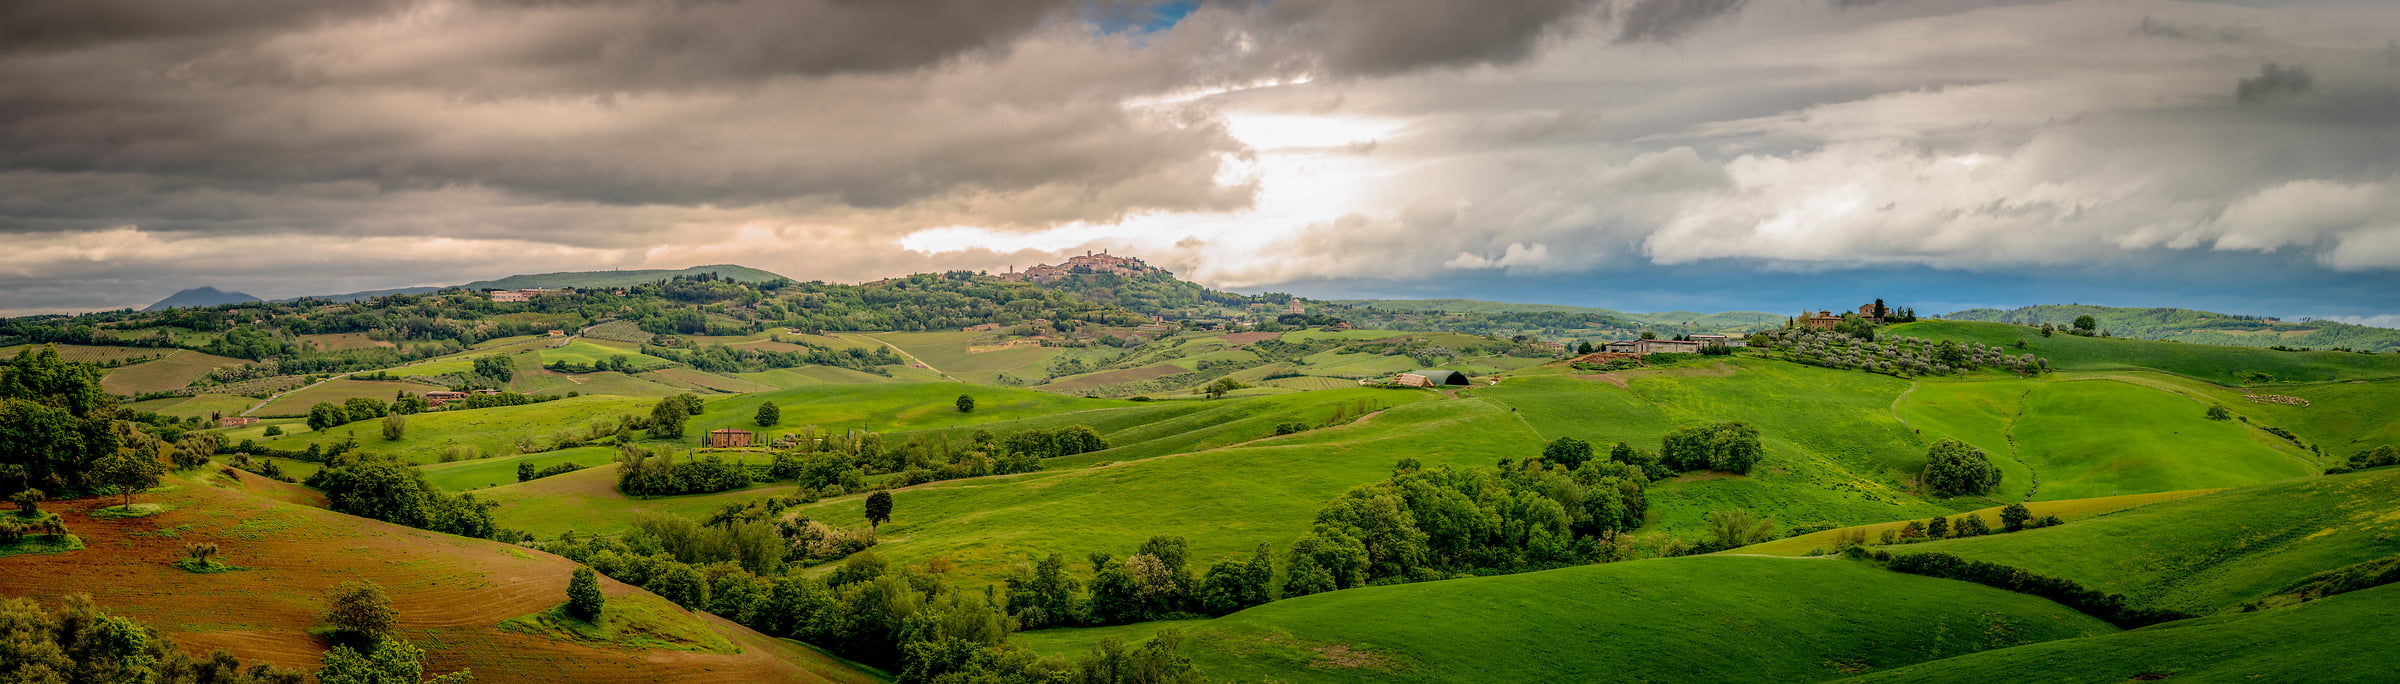 228 megapixels! A very high resolution, large-format VAST photo print of a Tuscan landscape; photograph created by Justin Katz in Chianti, Tuscany, Italy